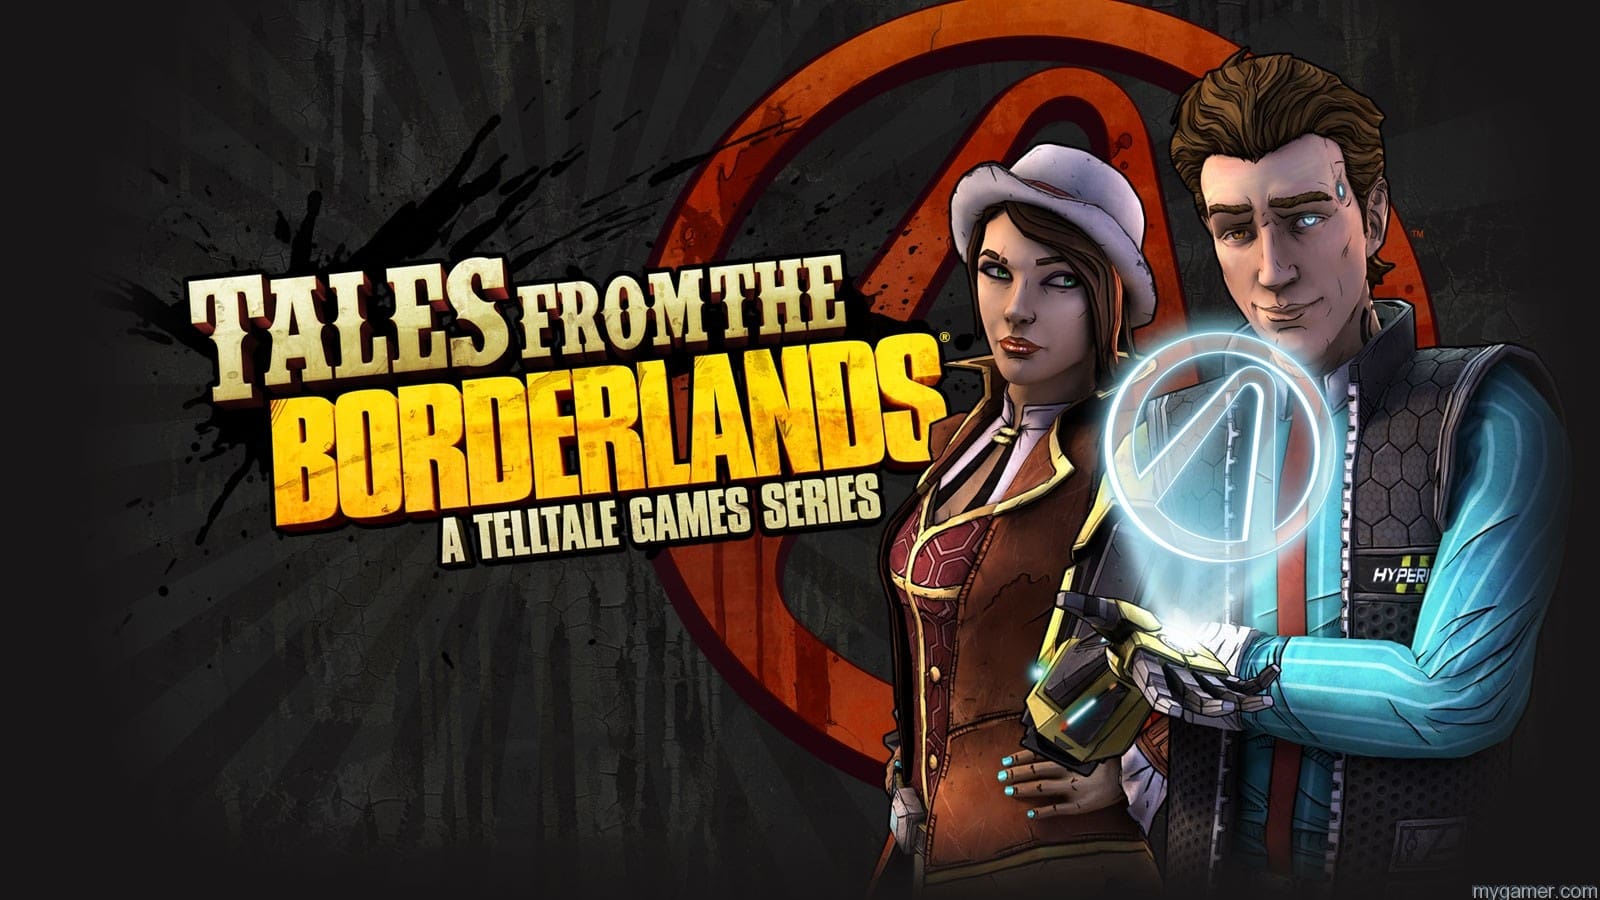 Tales from teh borderlands